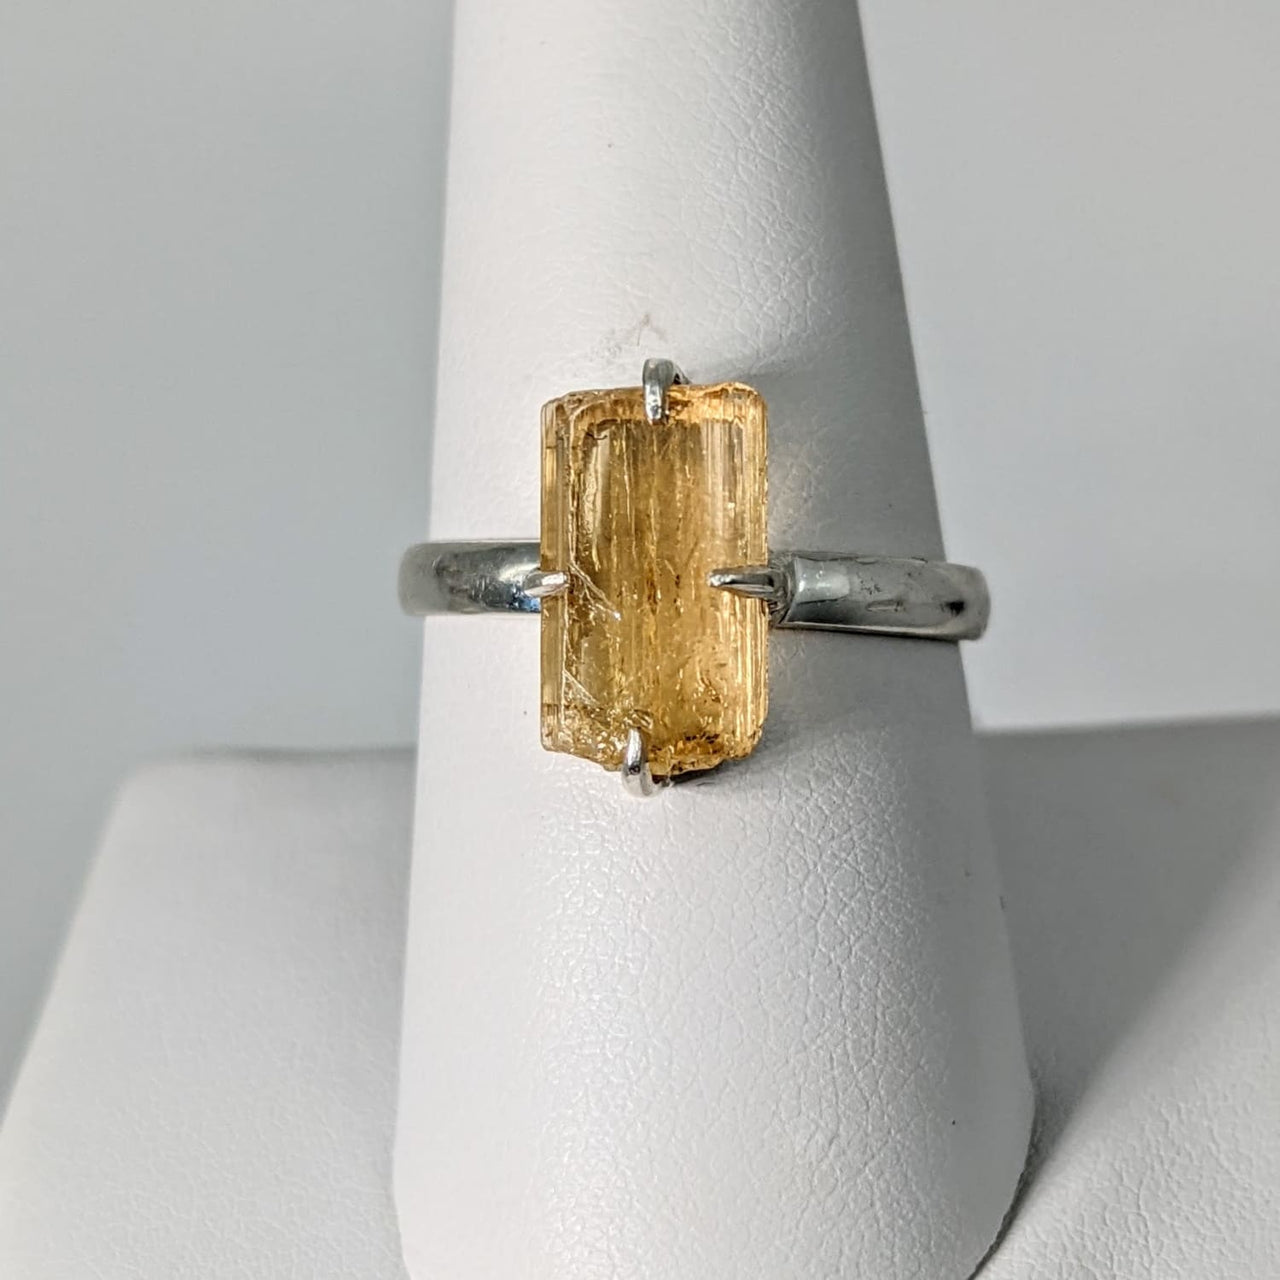 Imperial Topaz Rough Sterling Silver Ring #SK8324 - $95